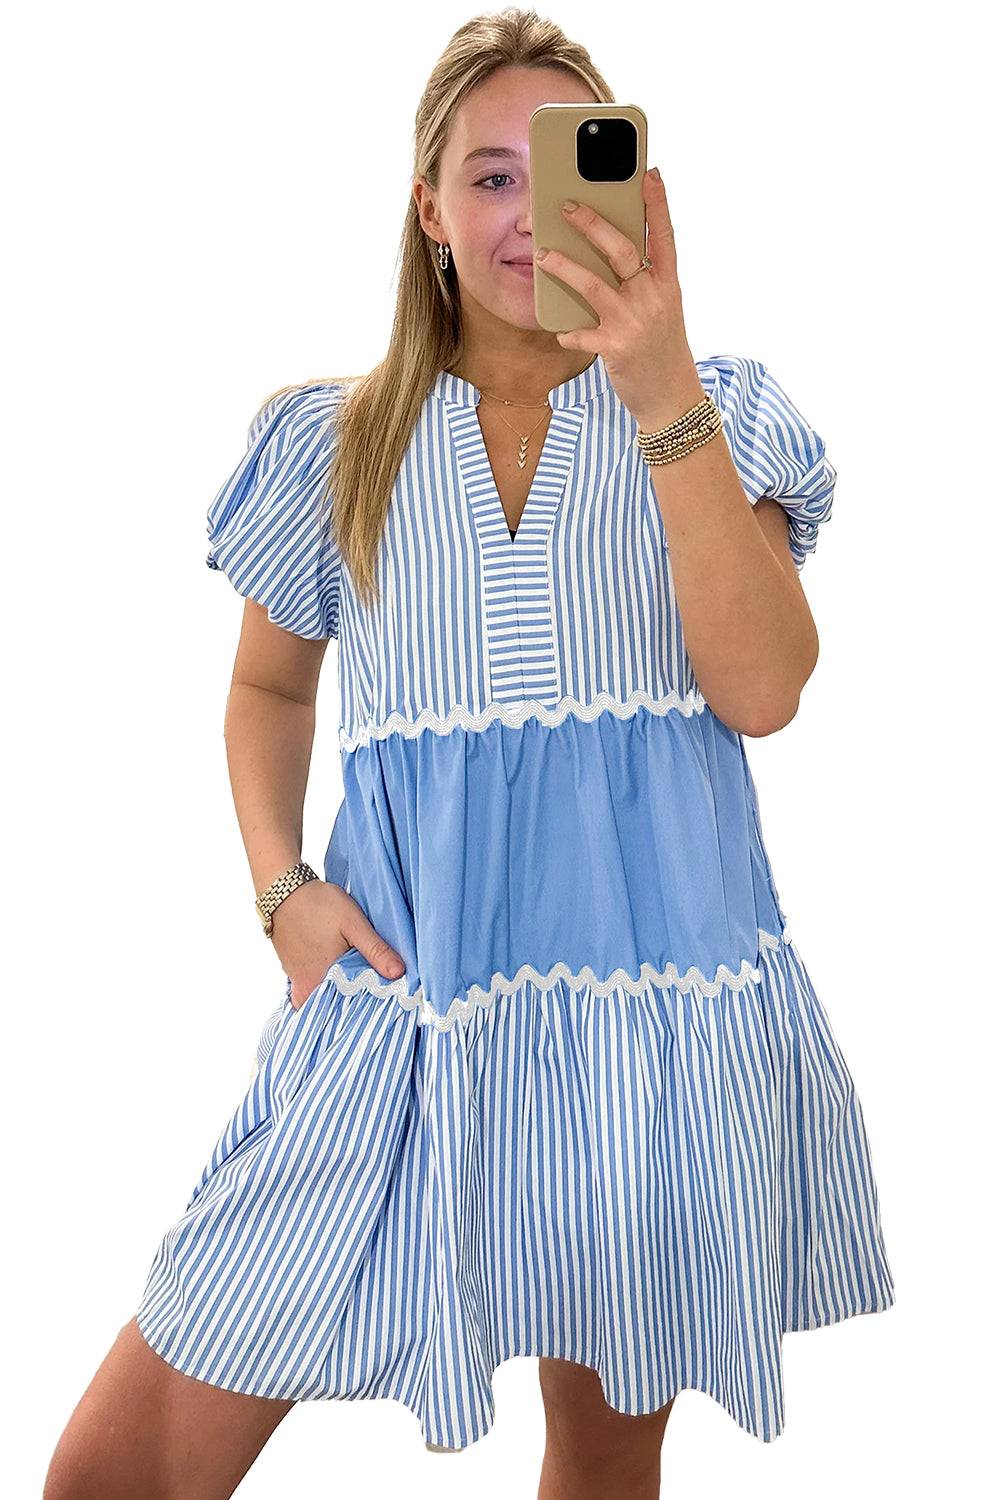 a woman taking a picture of herself in a blue and white dress